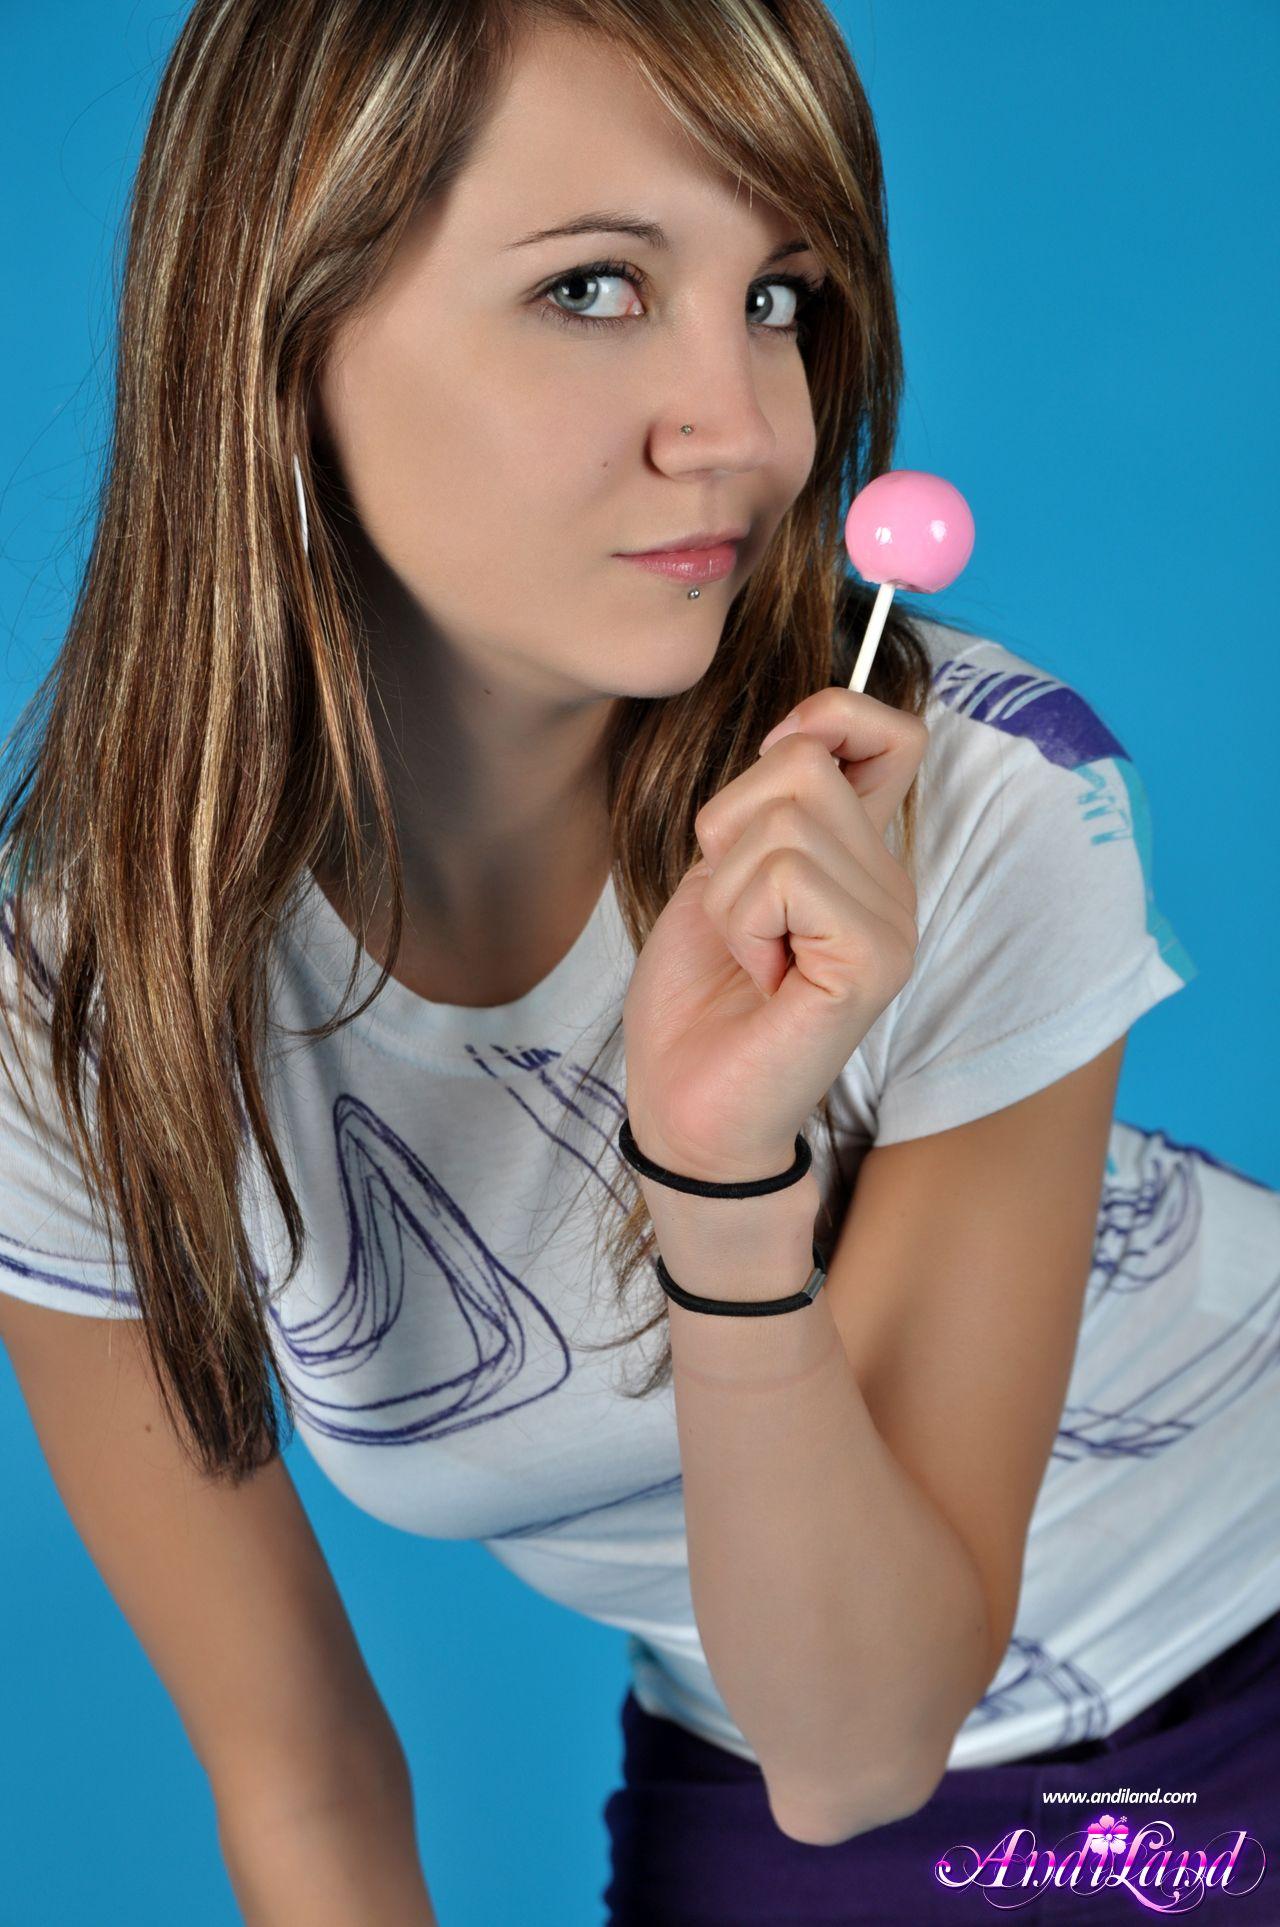 Pictures of Andi Land sucking on a lollipop